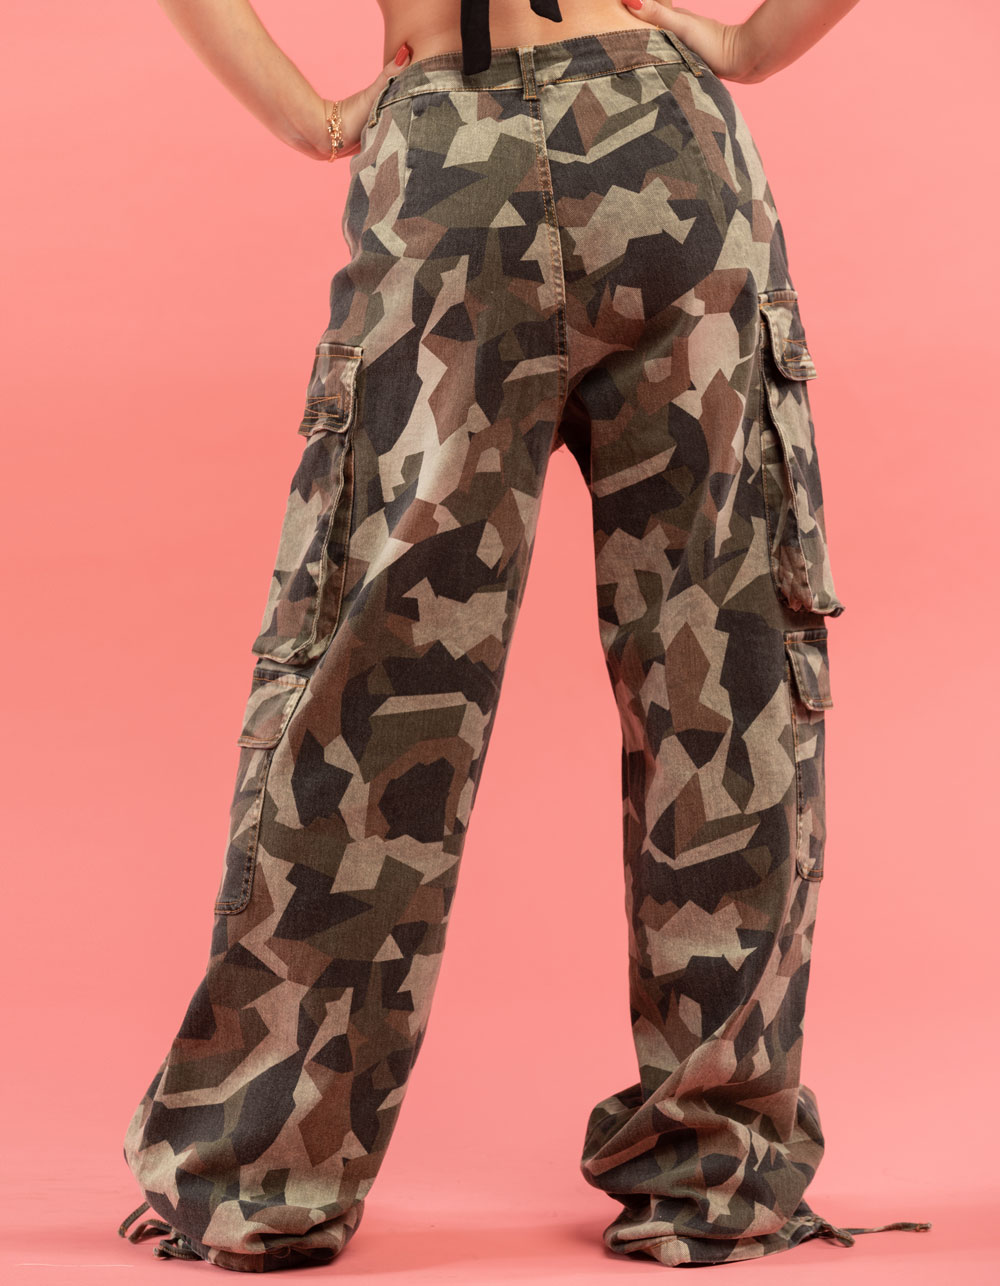 Jwzuy Women's Tie Dye Camo Cargo Pants High Waisted Straight Leg Pants with Pockets Camouflage L, Size: Large, Green